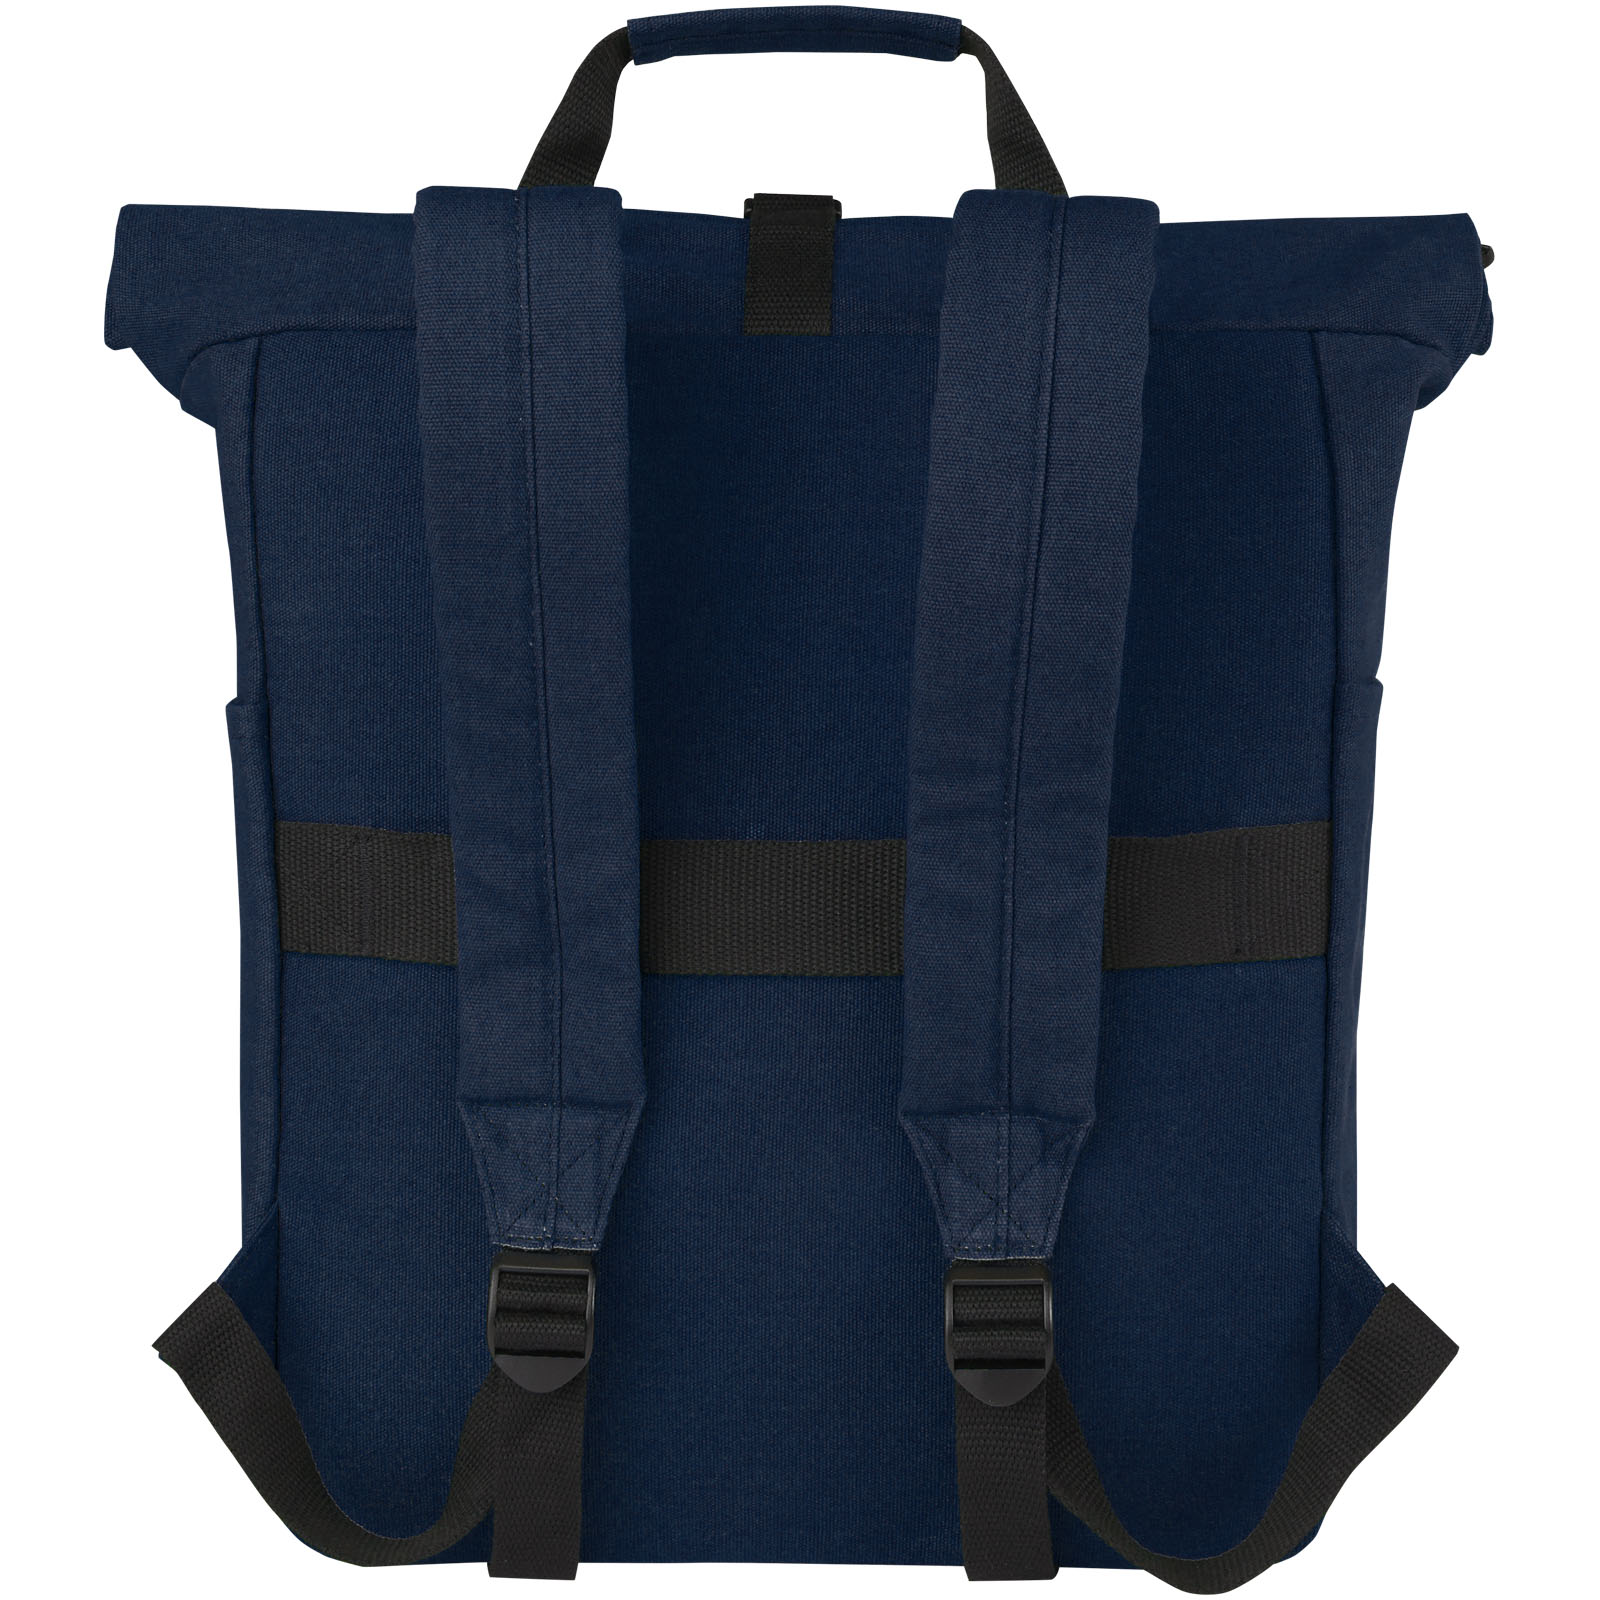 Advertising Laptop Backpacks - Joey 15” GRS recycled canvas rolltop laptop backpack 15L - 2